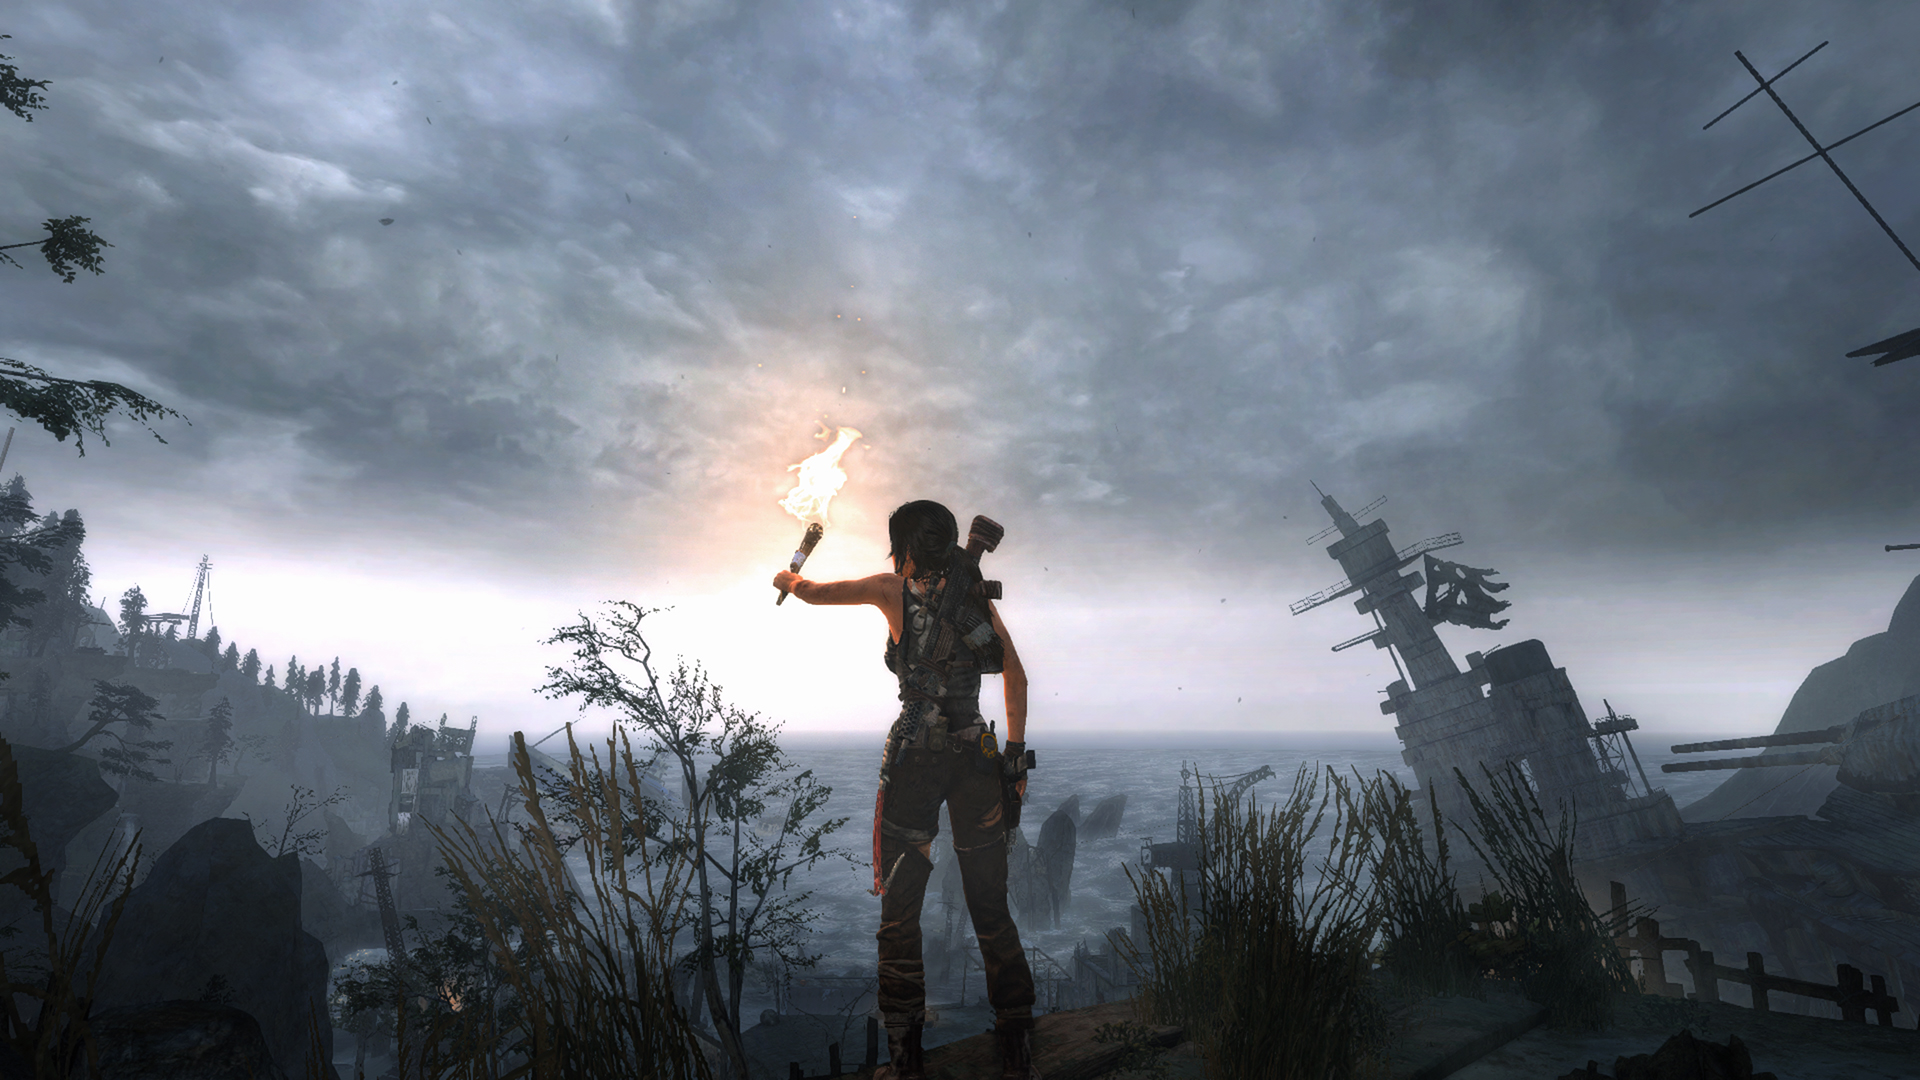 Lara Croft inspects a viewpoint over the Shipwreck beach.